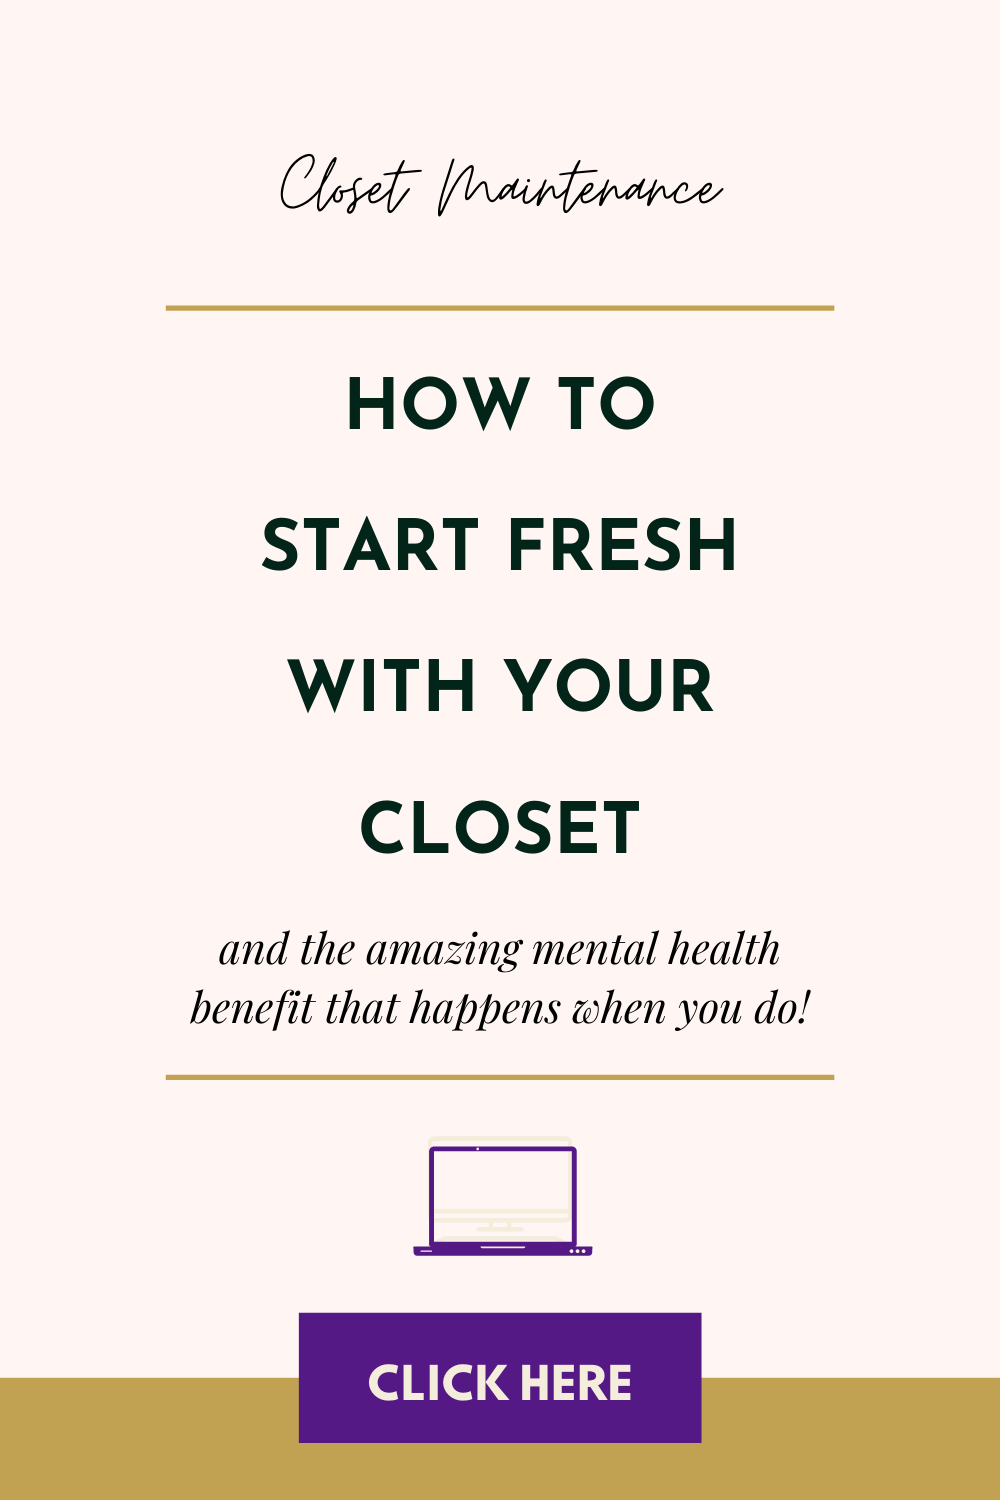 The Mental Health Benefit to Purging Your Closet